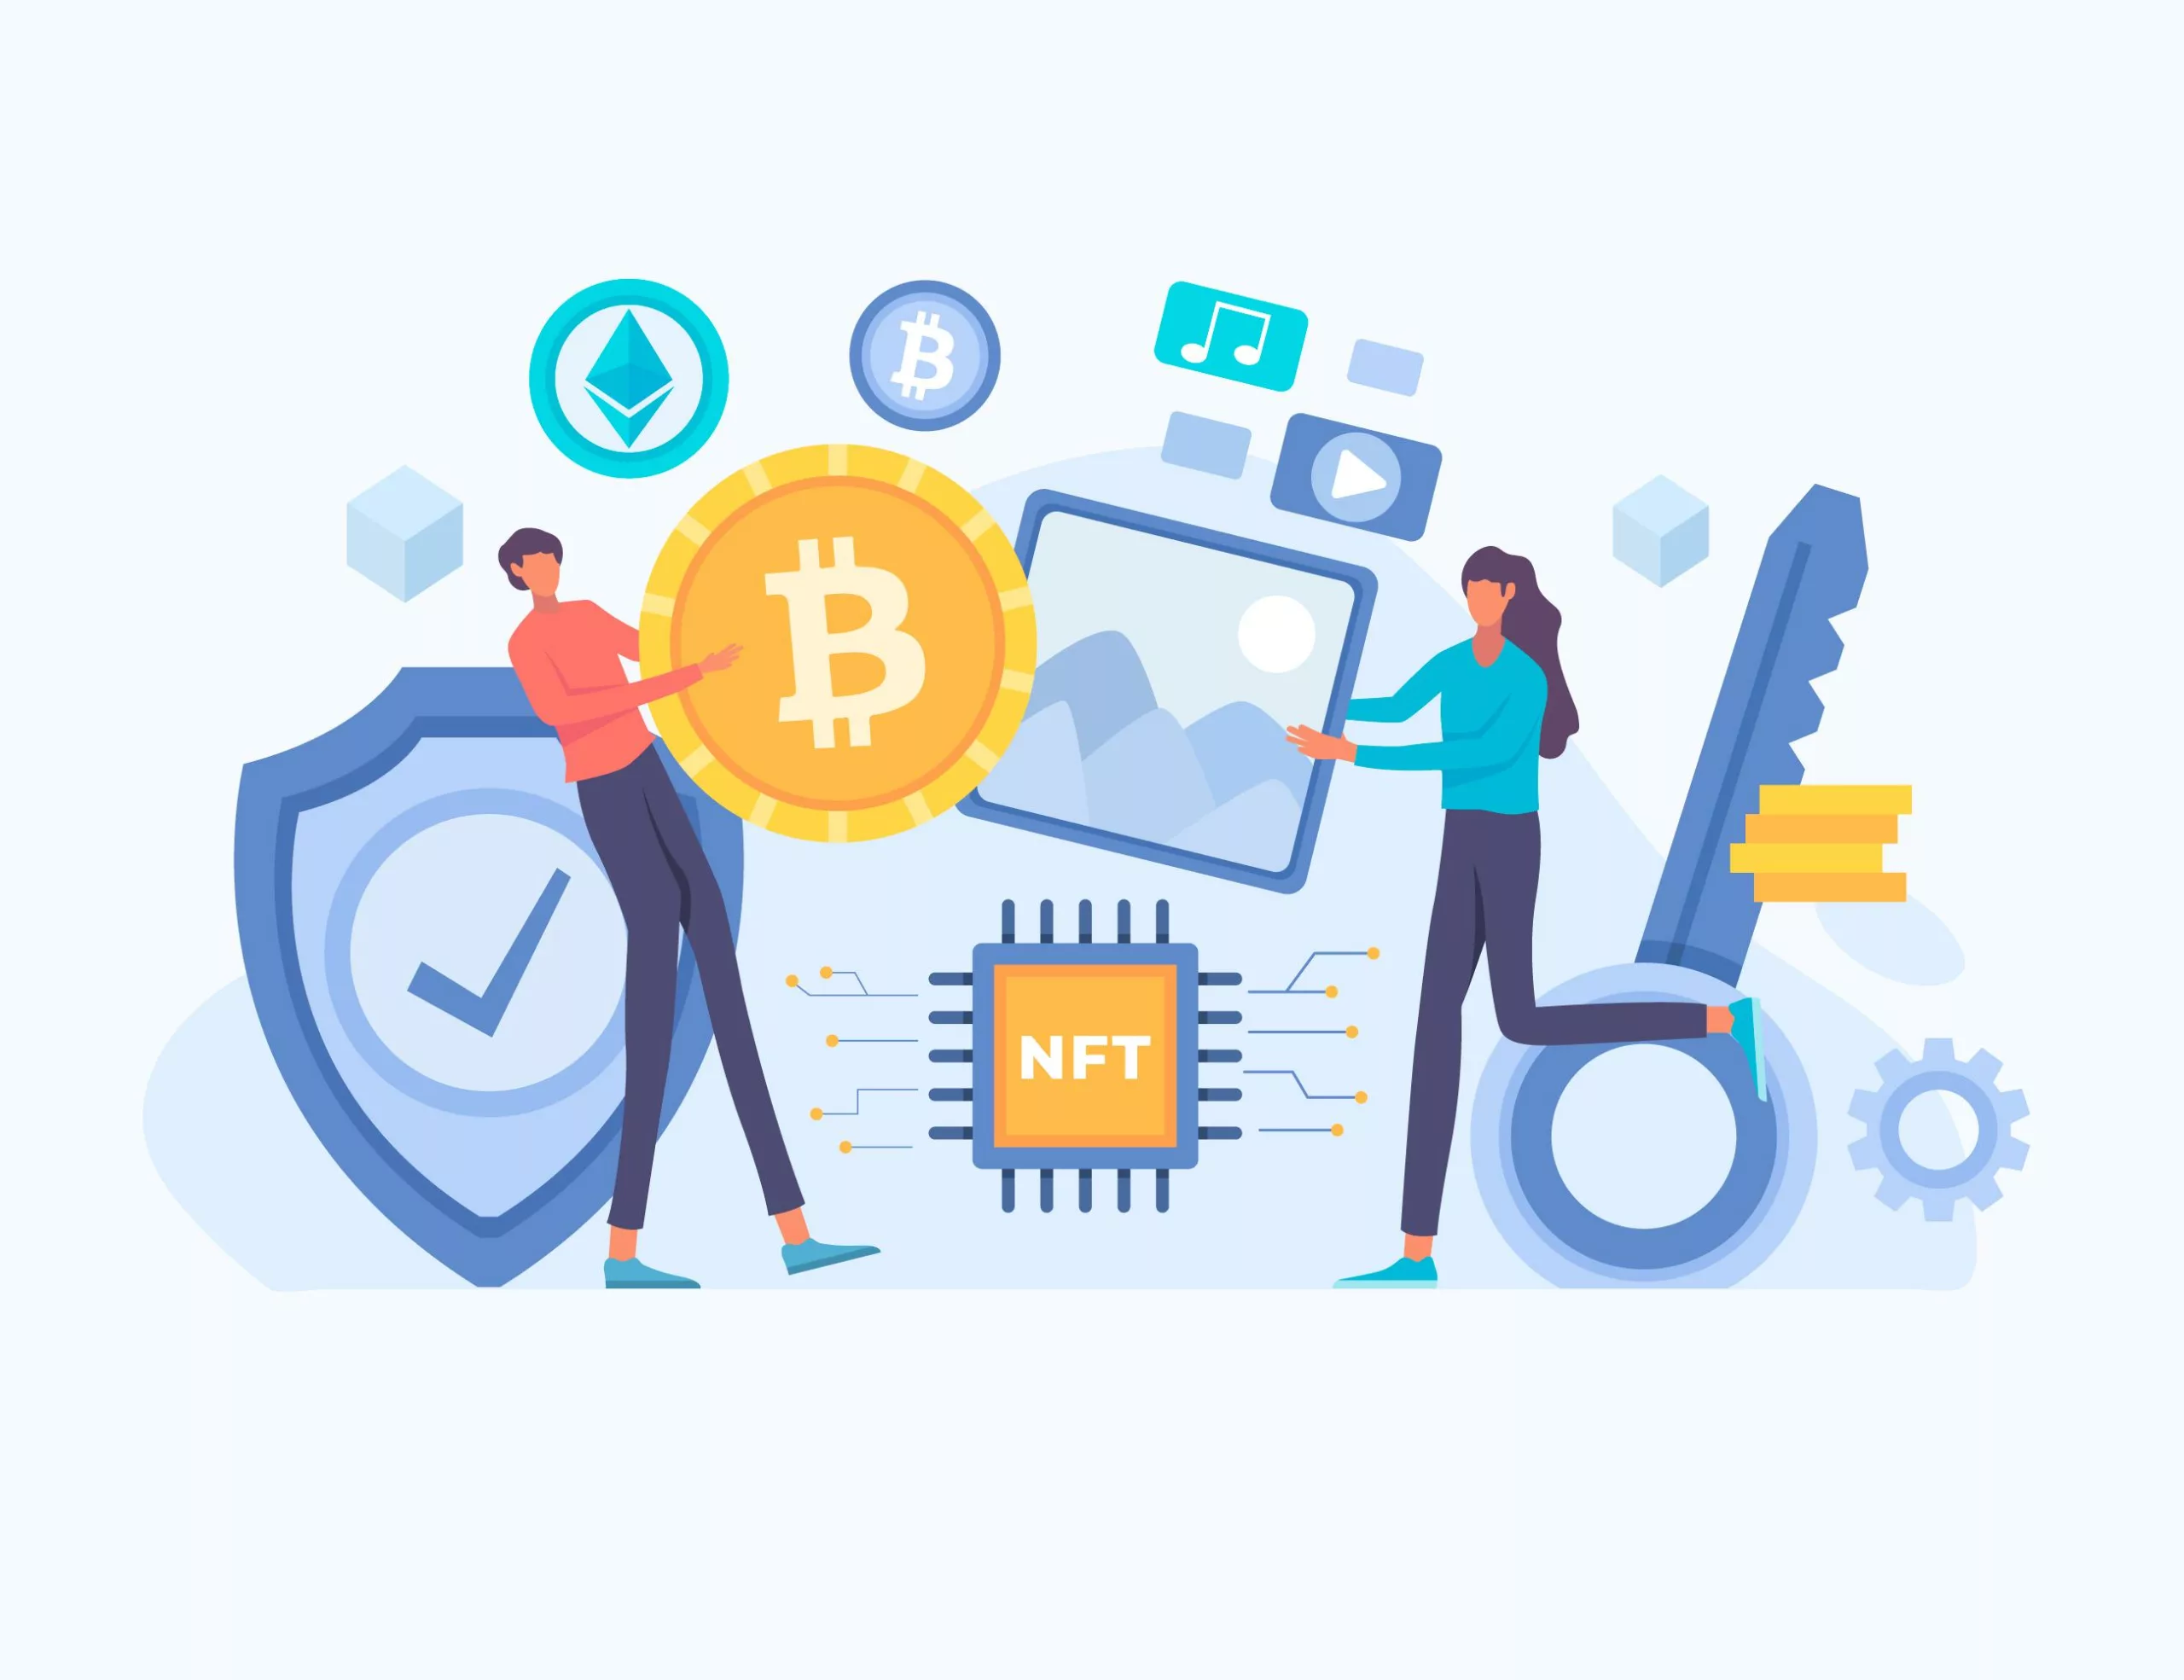 4 Expert Tips For Buying And Selling Cryptocurrencies Securely & Safely